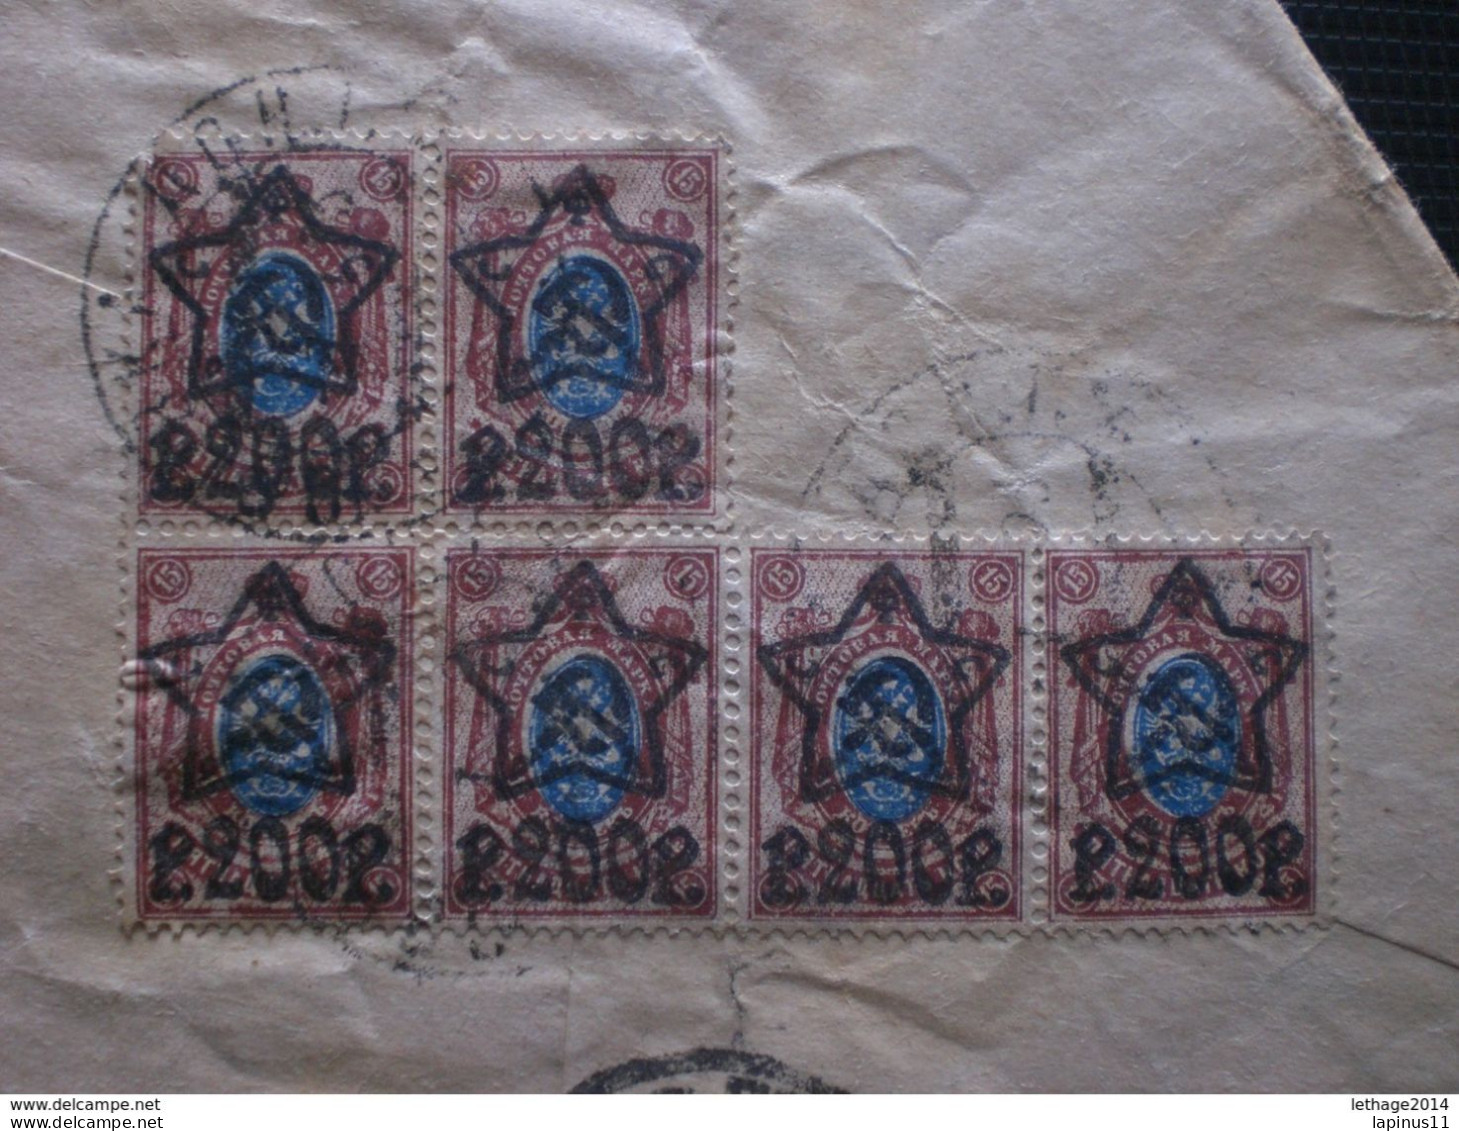 RUSSIA RUSSIE РОССИЯ STAMPS COVER 1923 RUSSIE TO ITALY FULL STAMPS RRR RIF.TAGG. (79) - Cartas & Documentos